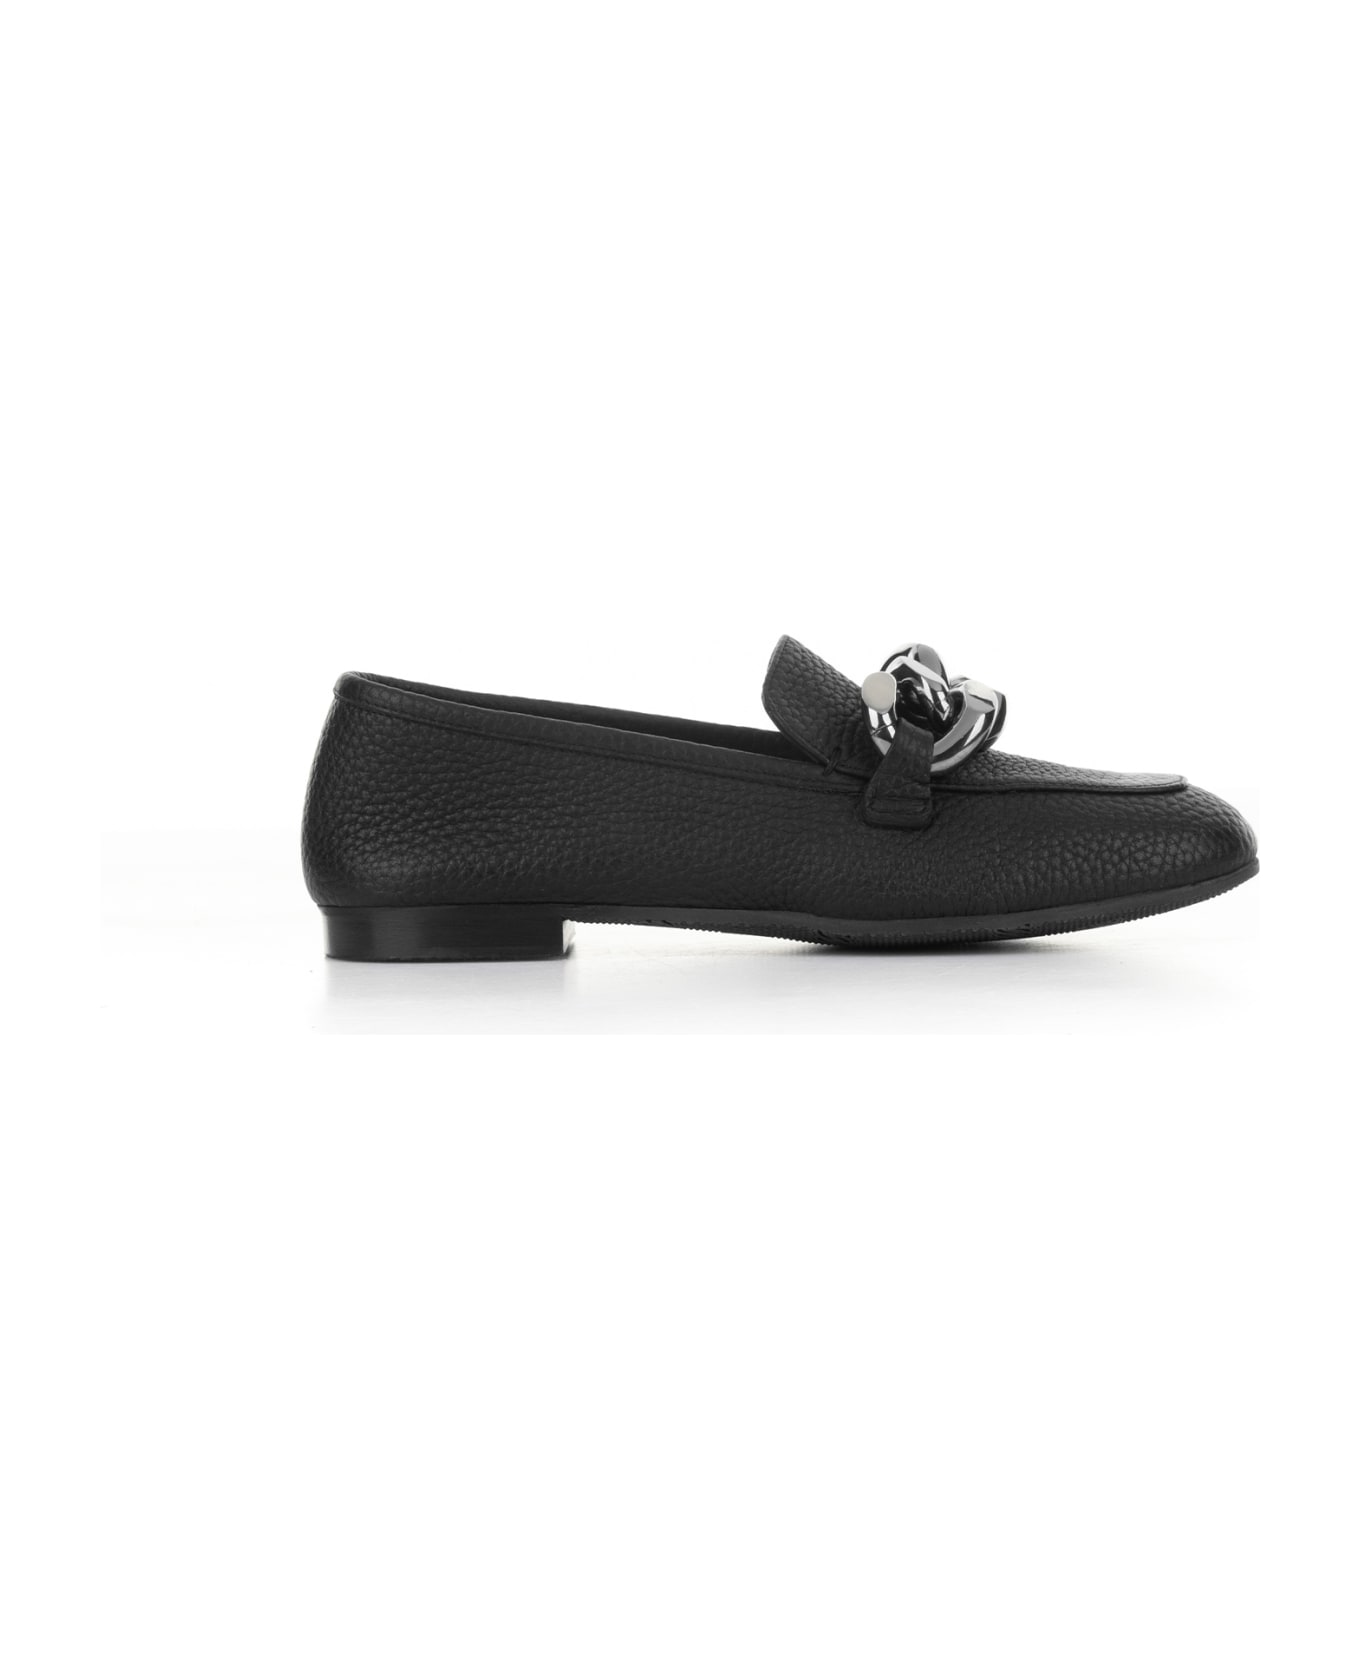 Casadei Hammered Leather Moccasin With Chain - NERO